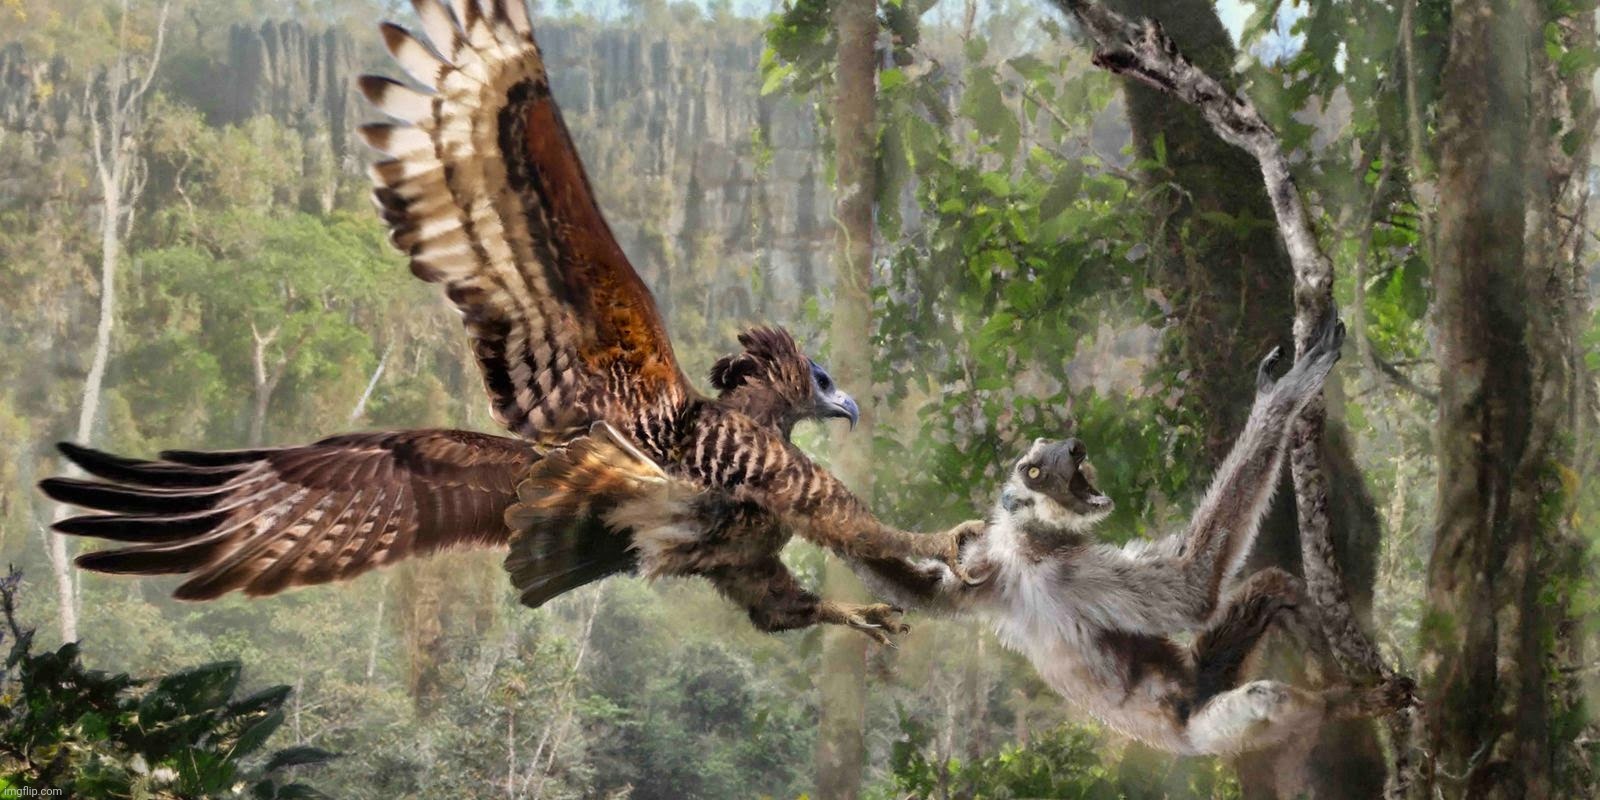 Malagasy crowned eagle Stephanoaetus mahery, was exciting; by analogy with the extant African species S. coronatus, it likely wa | image tagged in malagasy crowned eagle,stephanoaetus mahery,sloth lemur,palaeopropithecus spp | made w/ Imgflip meme maker